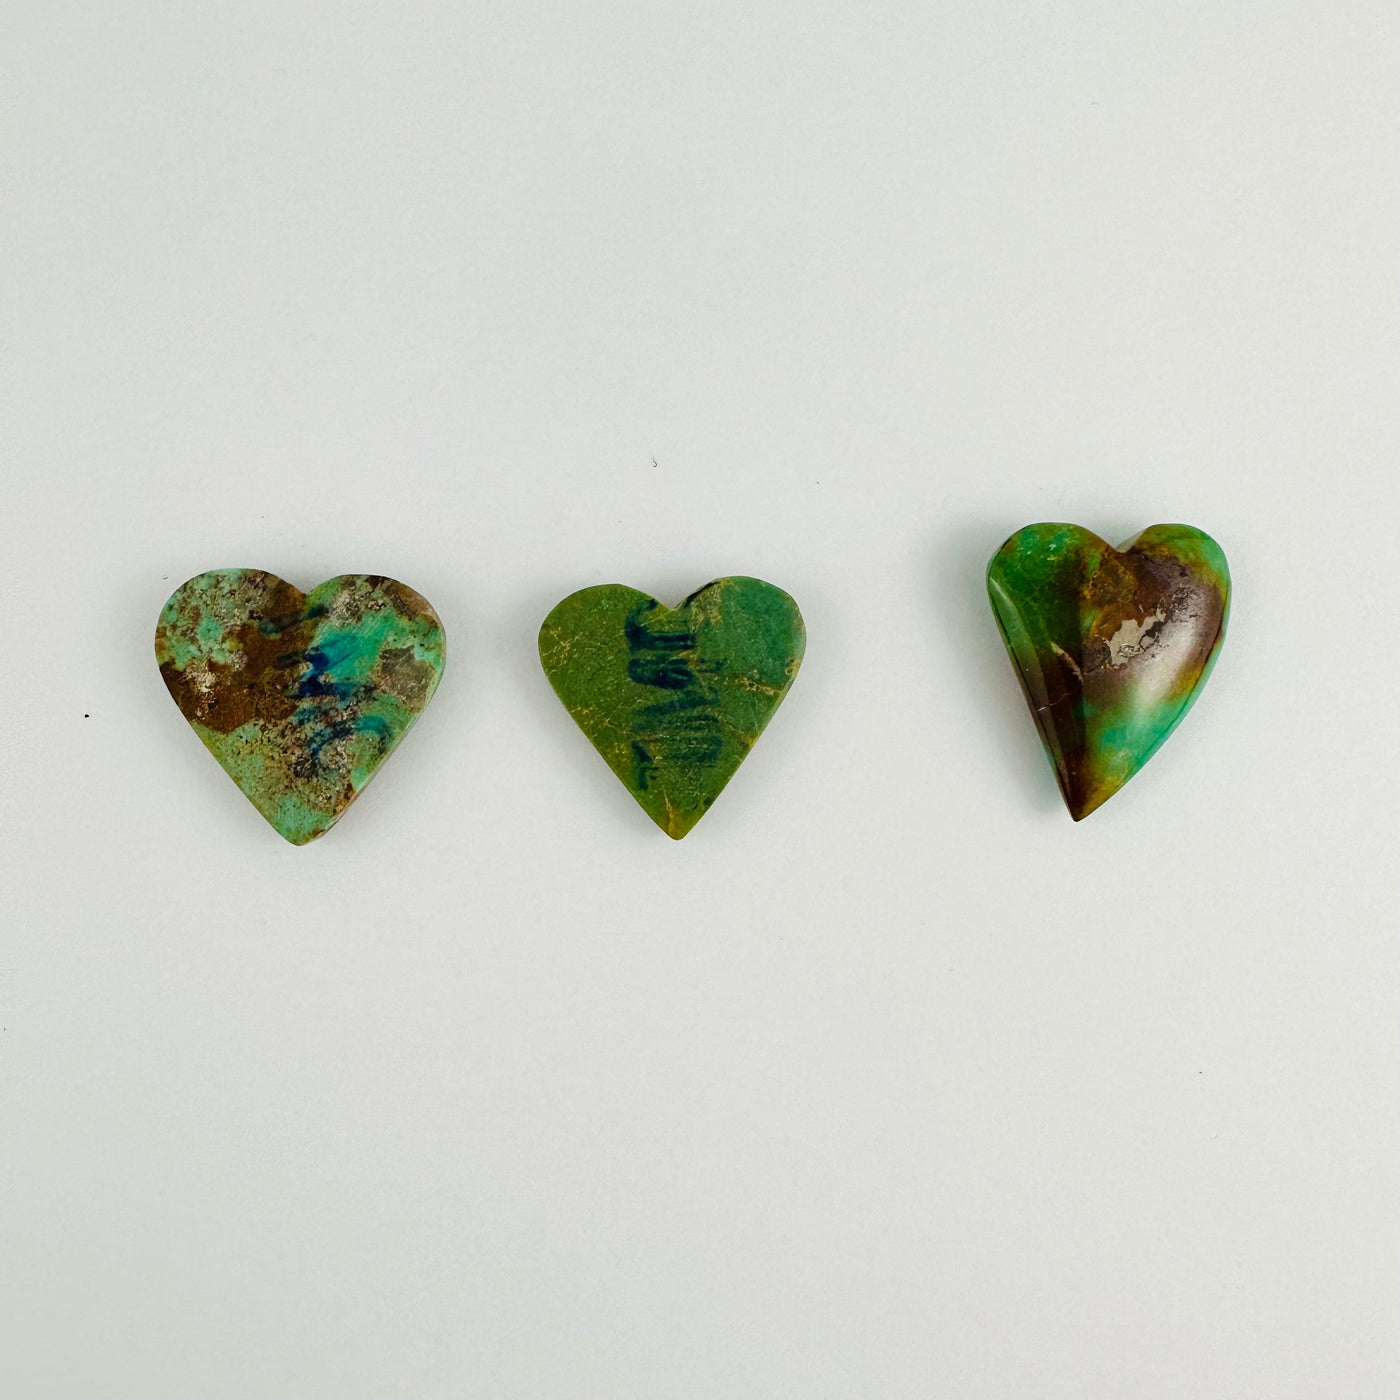 Backside of 3 Turquoise Heart Cabochons